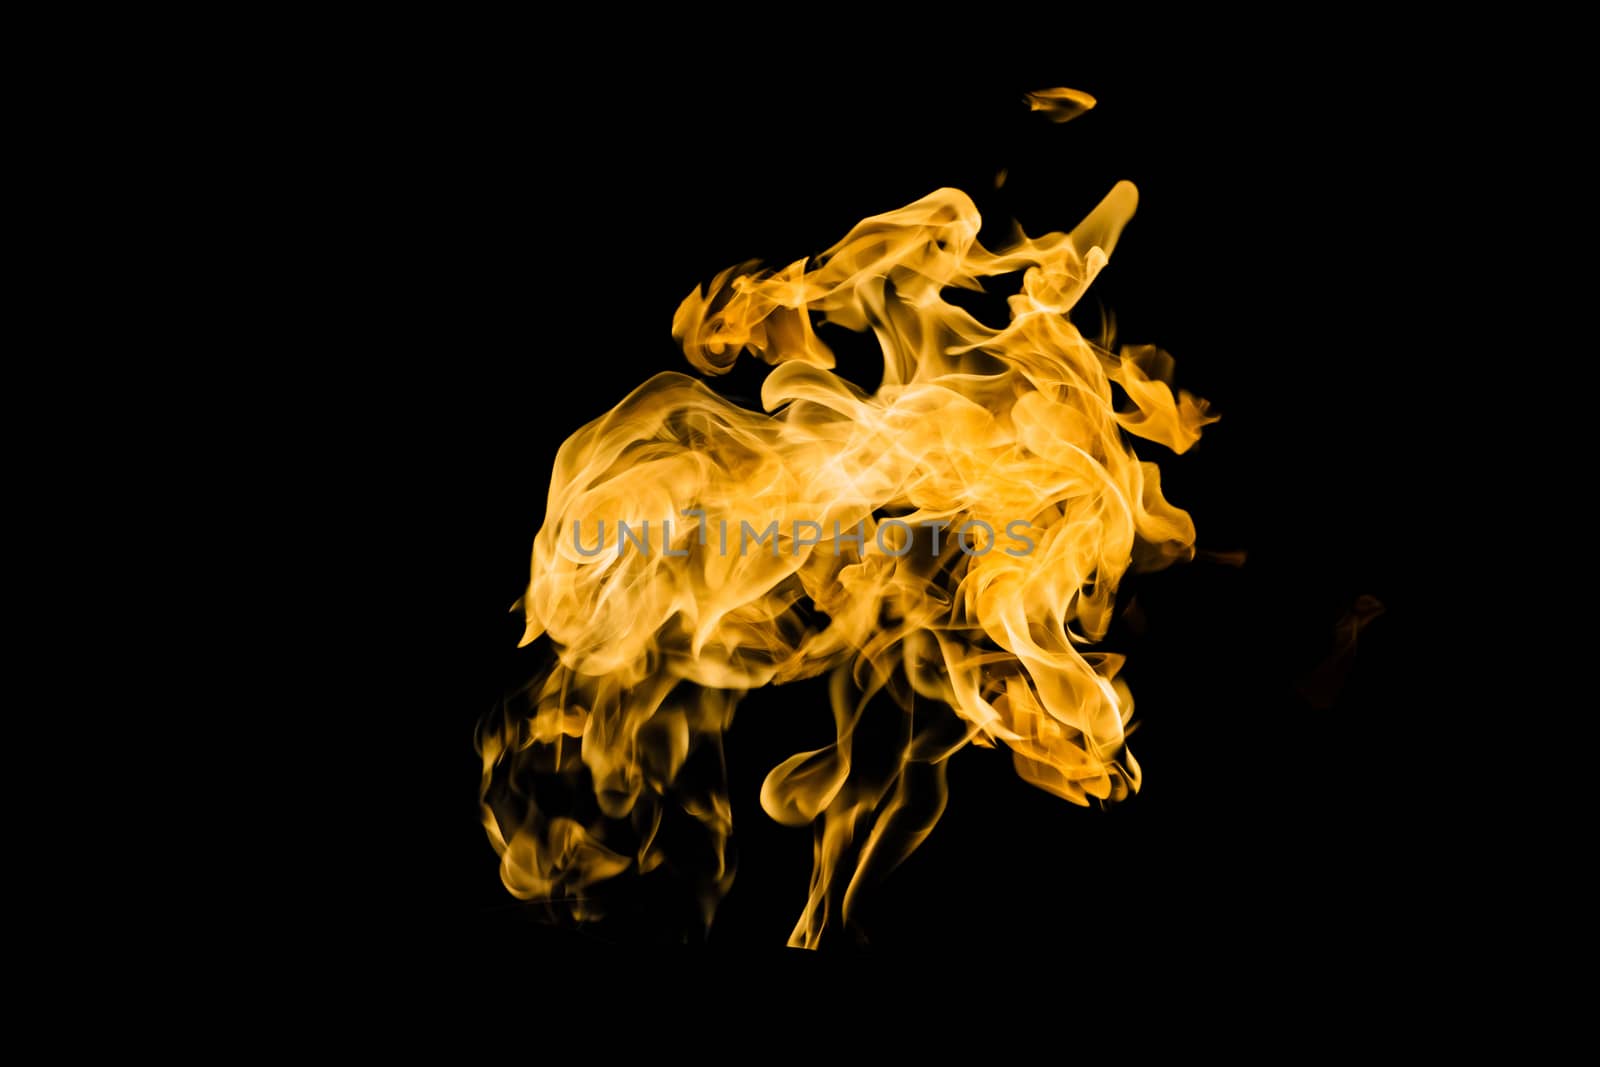 Fire flames on black background isolated. Burning gas or gasolin by YevgeniySam